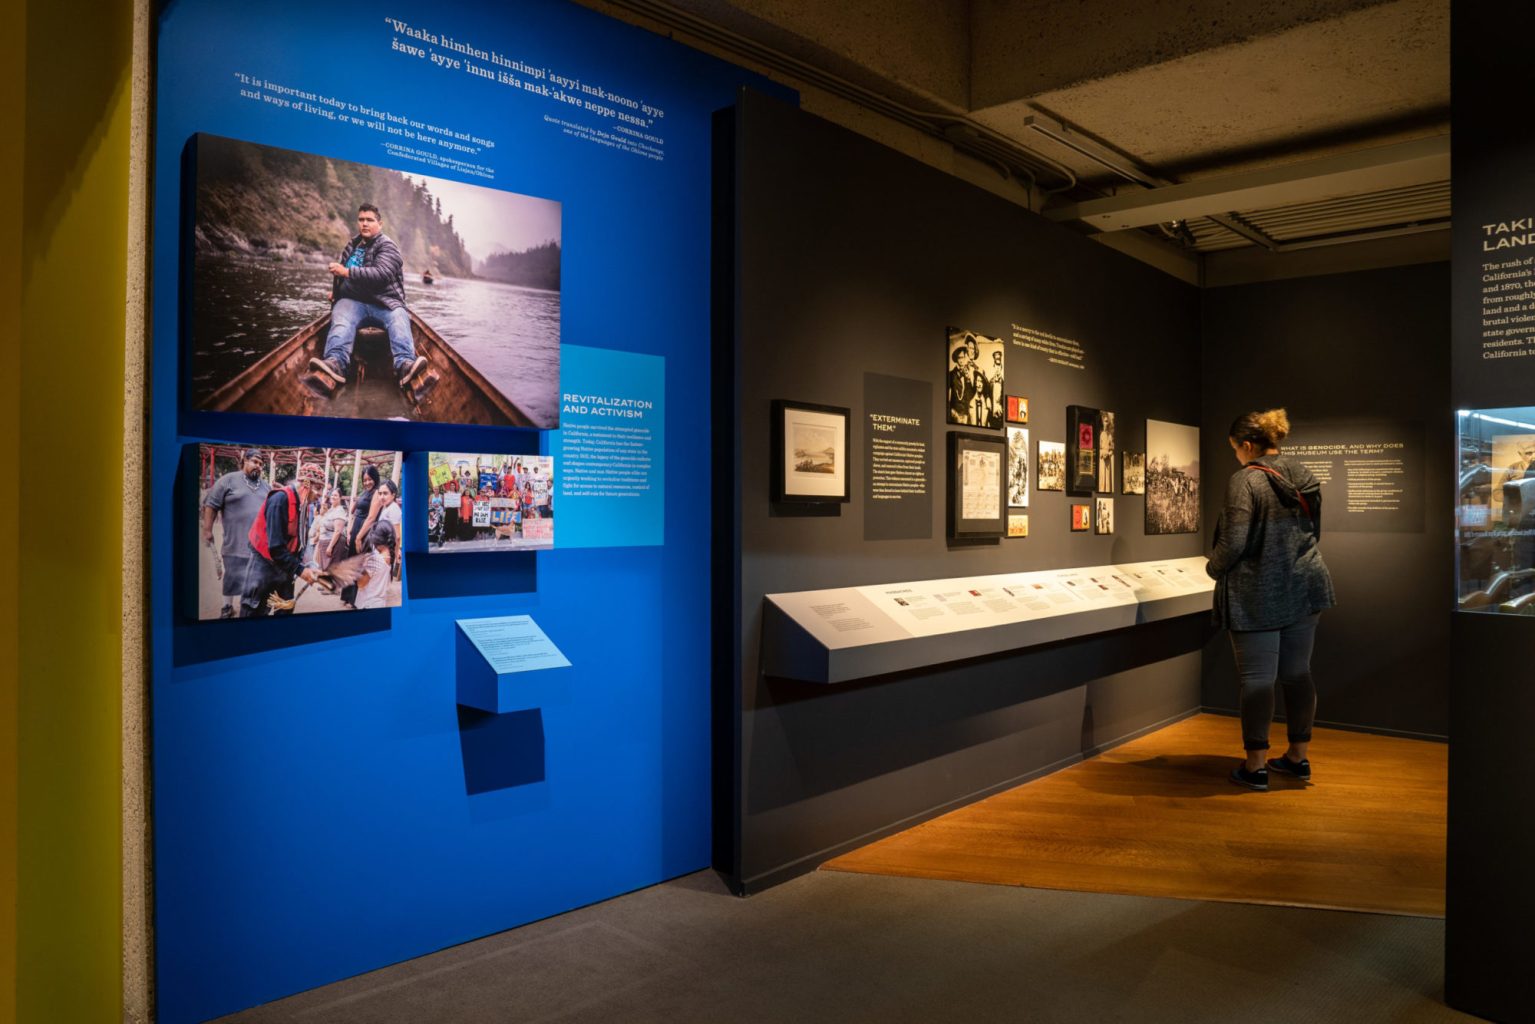 A view of a gallery with a blue wall and the label "Revitalization and Activism."